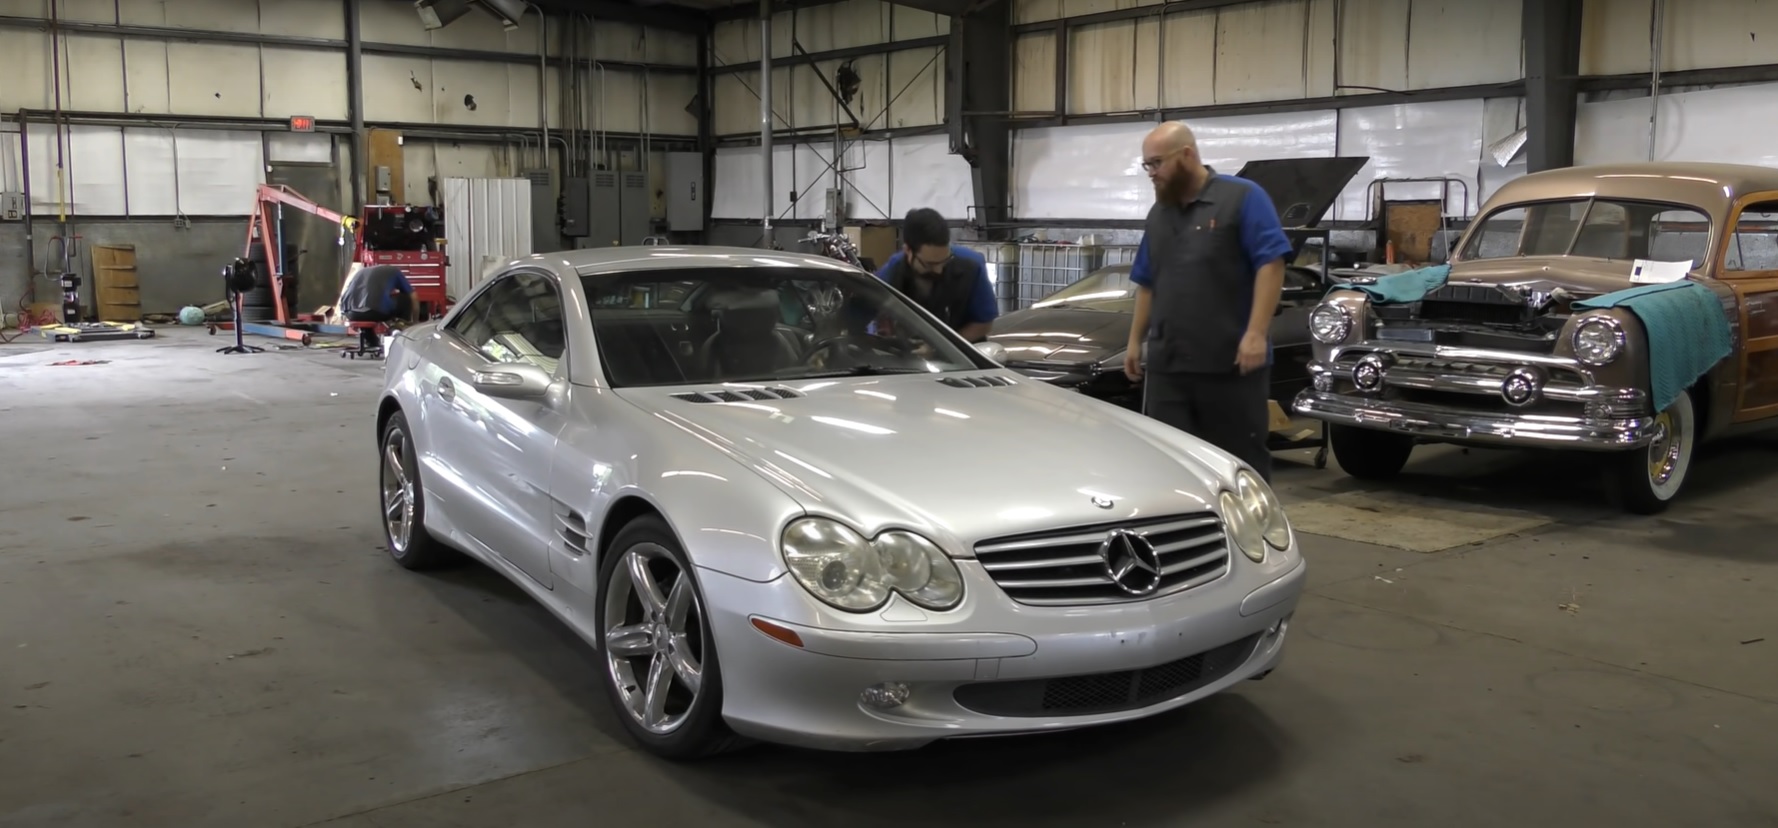 Good Deal Or Bust Is This 5 500 2004 Mercedes Benz Sl500 Worth It